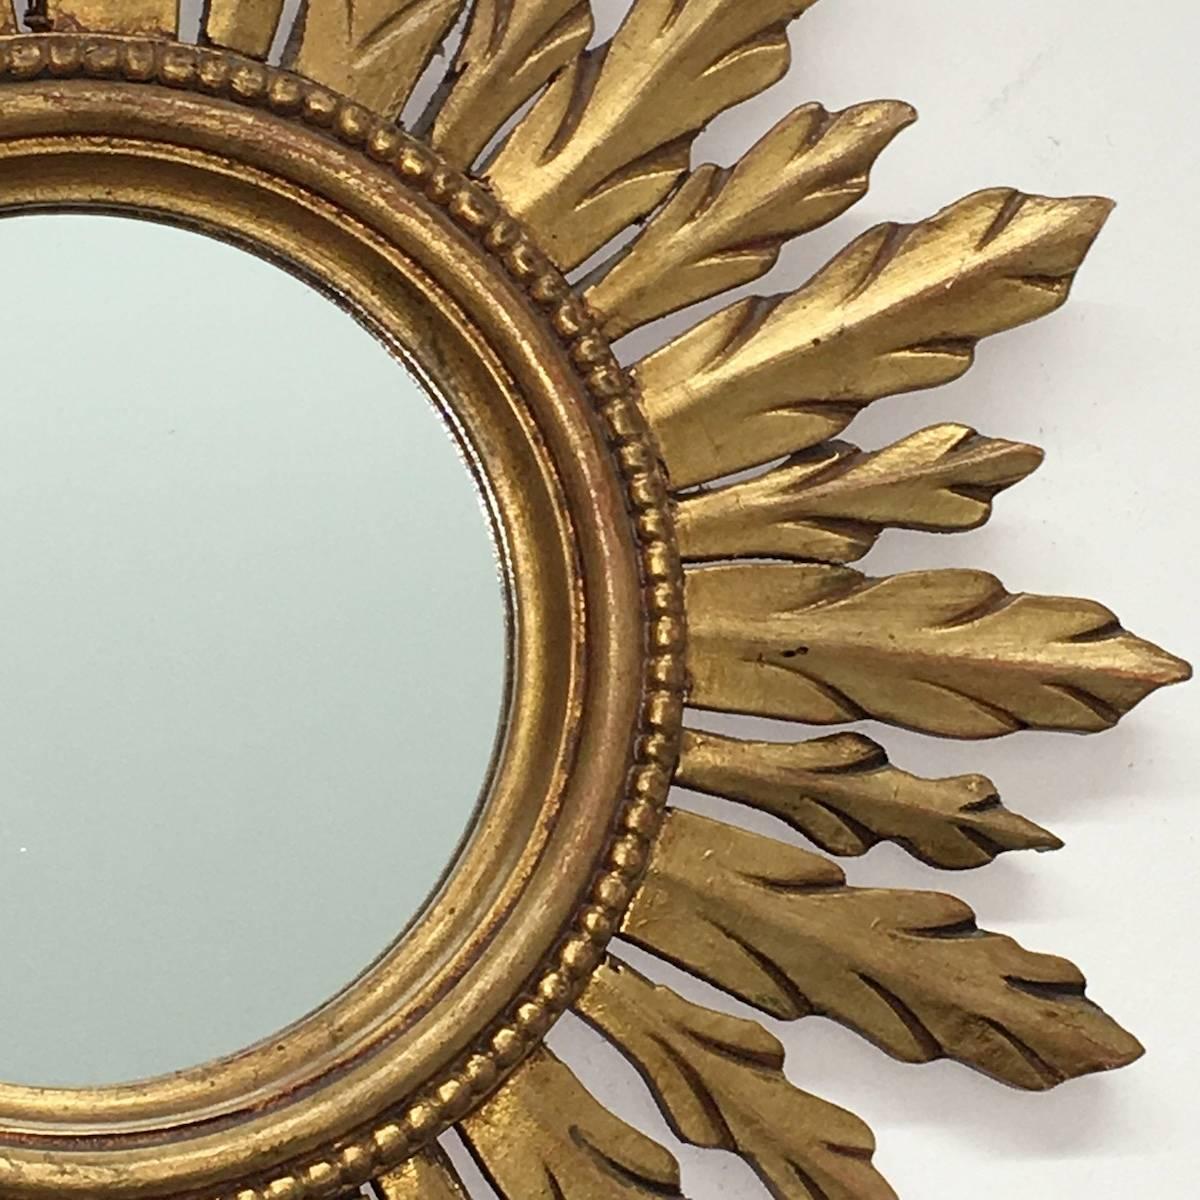 Gorgeous starburst mirror. 
Made of gilded wood.
No chips, no cracks, no repairs.
It measures approx. 19 1/4